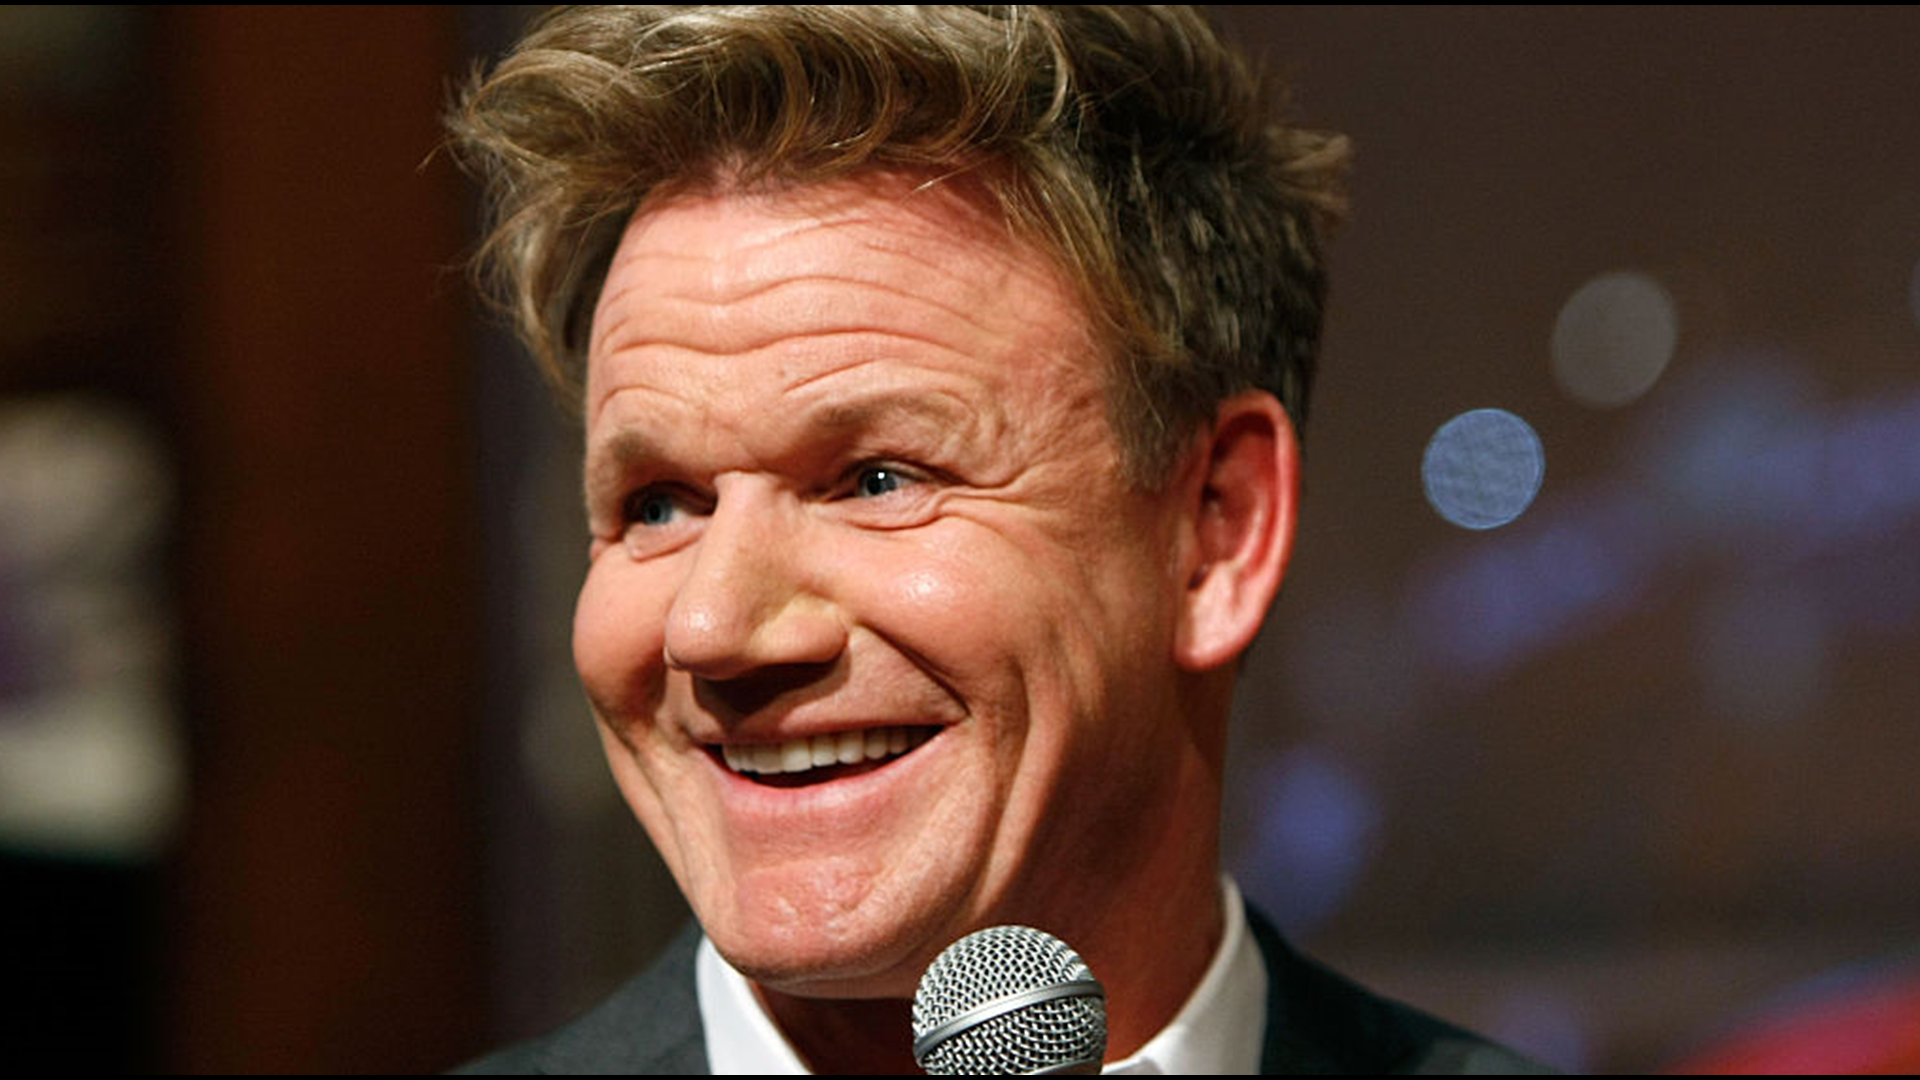 Legendary chef Gordon Ramsay has chosen North Carolina to be the home of his first ever "food market" concept.